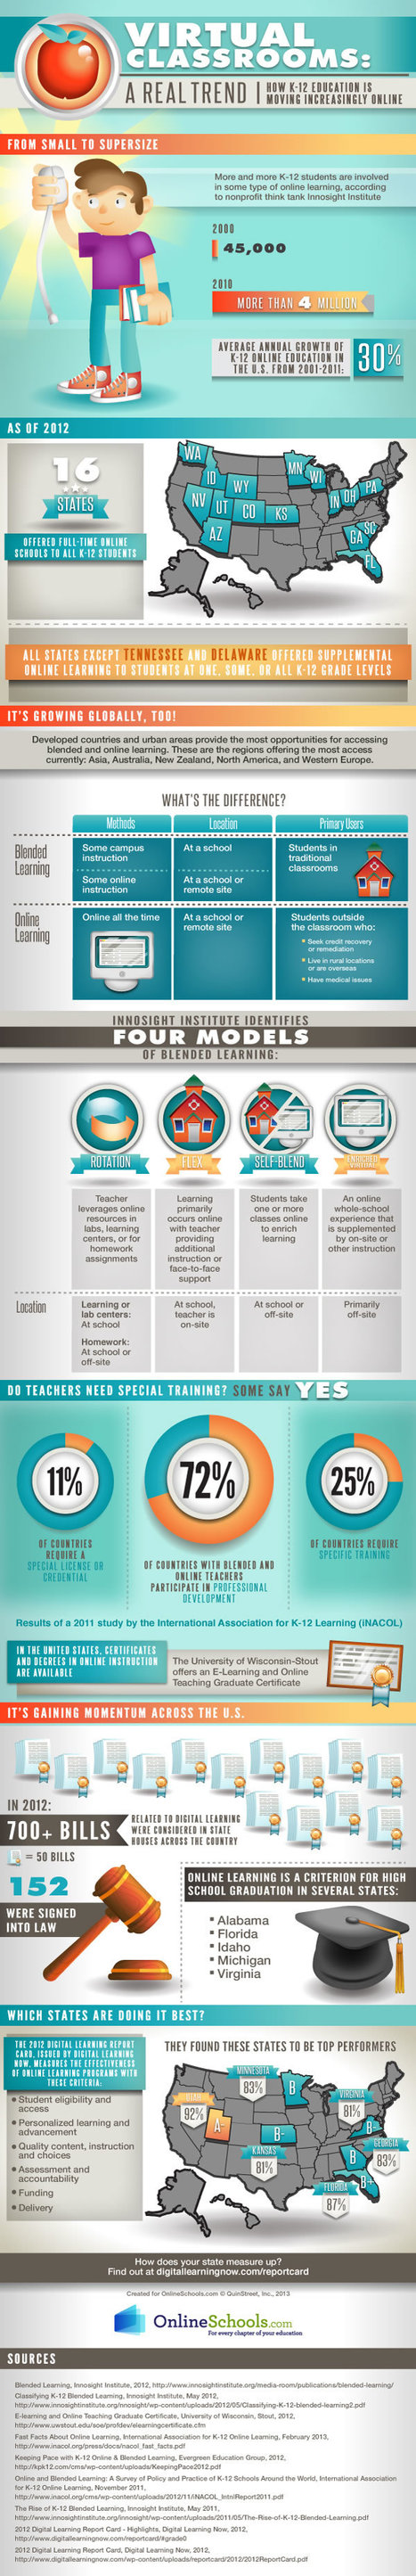 The Teacher's Quick Guide To Blended Learning [Infographic] | maestro Julio | Scoop.it